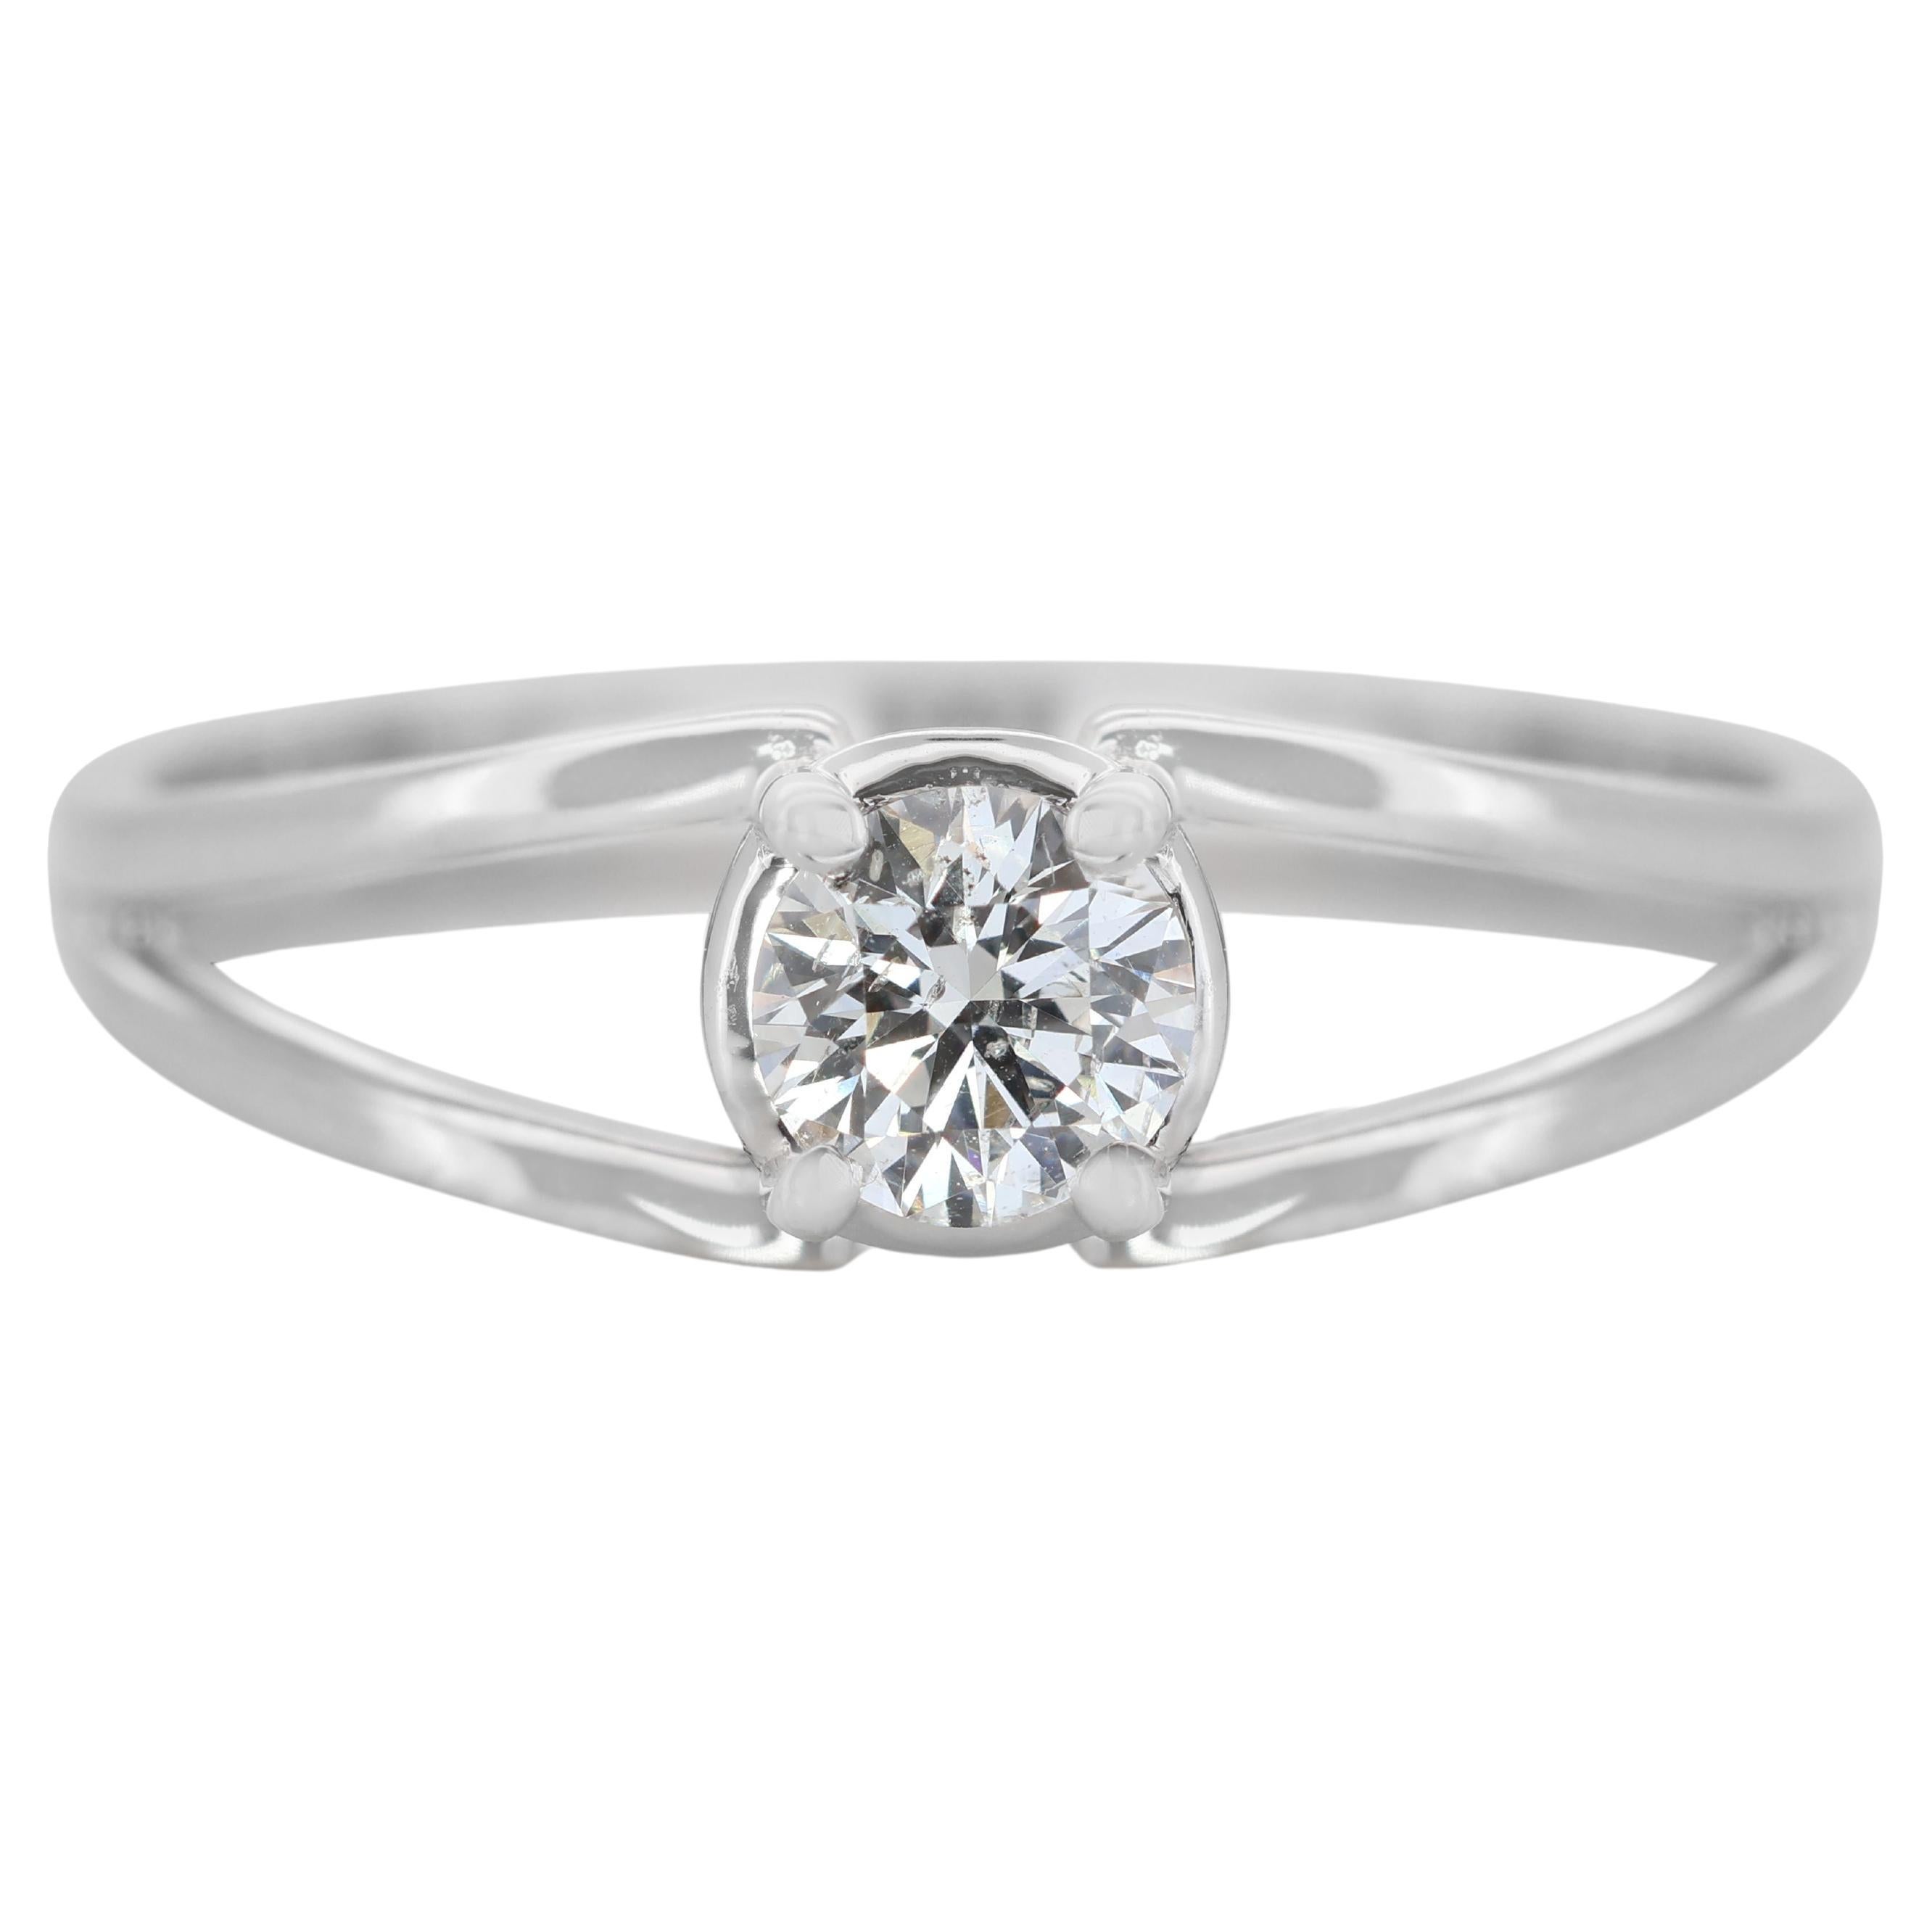 Beautiful 0.32ct Diamond Solitaire Ring set in 14K White Gold